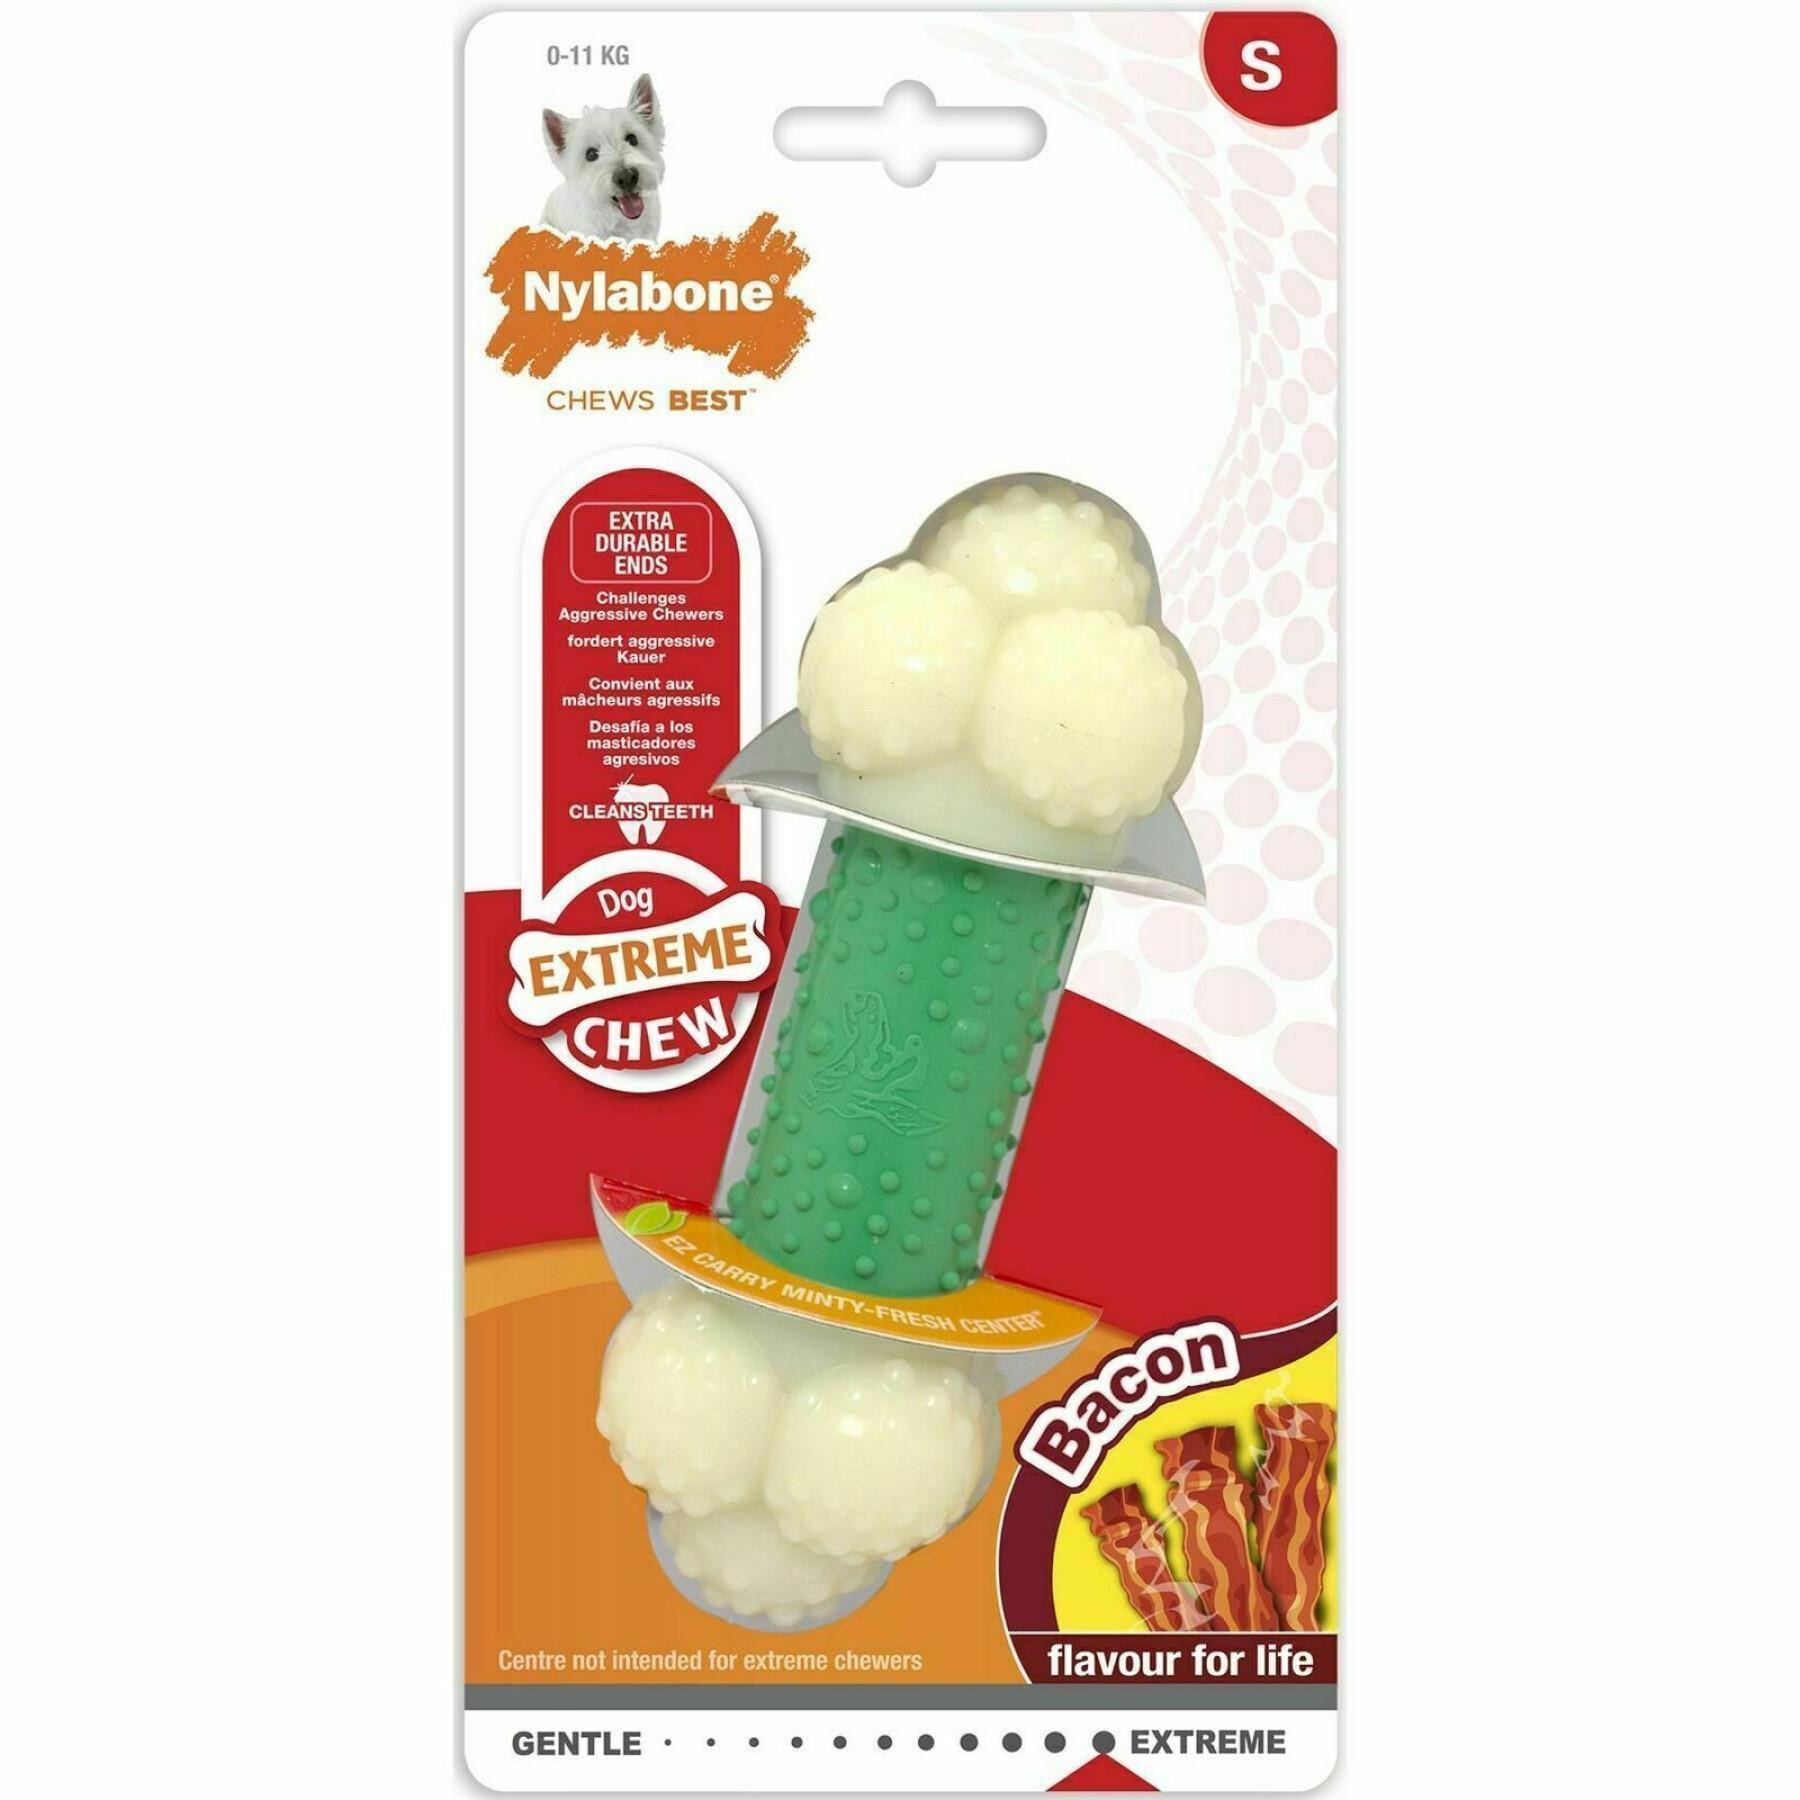 Juguete para perro Nylabone Extreme Chew - Double Action Chew Bacon S